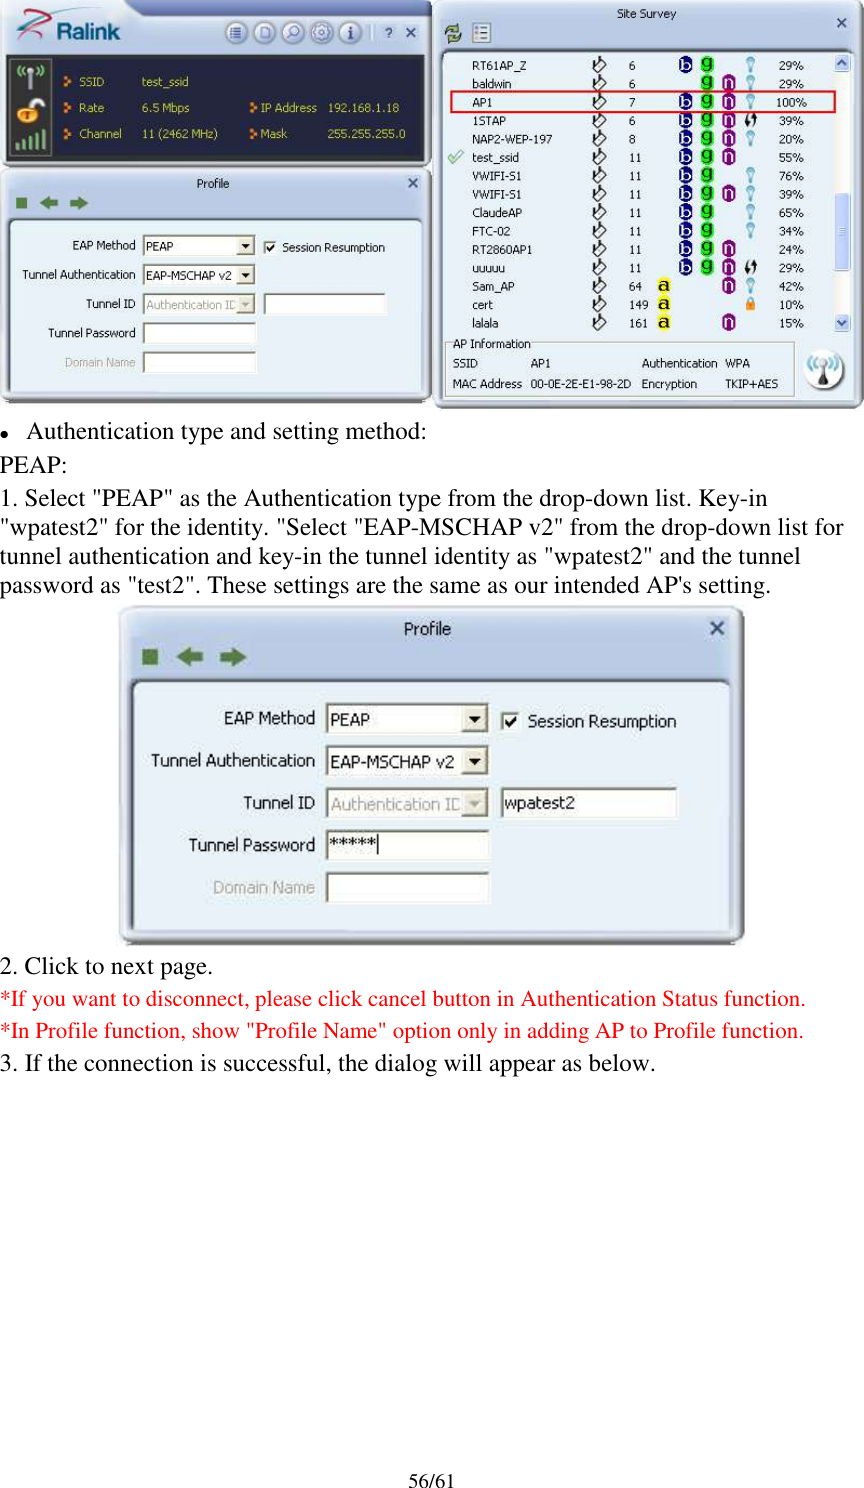 56/61Authentication type and setting method:PEAP:1. Select &quot;PEAP&quot; as the Authentication type from the drop-down list. Key-in&quot;wpatest2&quot; for the identity. &quot;Select &quot;EAP-MSCHAP v2&quot; from the drop-down list fortunnel authentication and key-in the tunnel identity as &quot;wpatest2&quot; and the tunnelpassword as &quot;test2&quot;. These settings are the same as our intended AP&apos;s setting.2. Click to next page.*If you want to disconnect, please click cancel button in Authentication Status function.*In Profile function, show &quot;Profile Name&quot; option only in adding AP to Profile function.3. If the connection is successful, the dialog will appear as below.